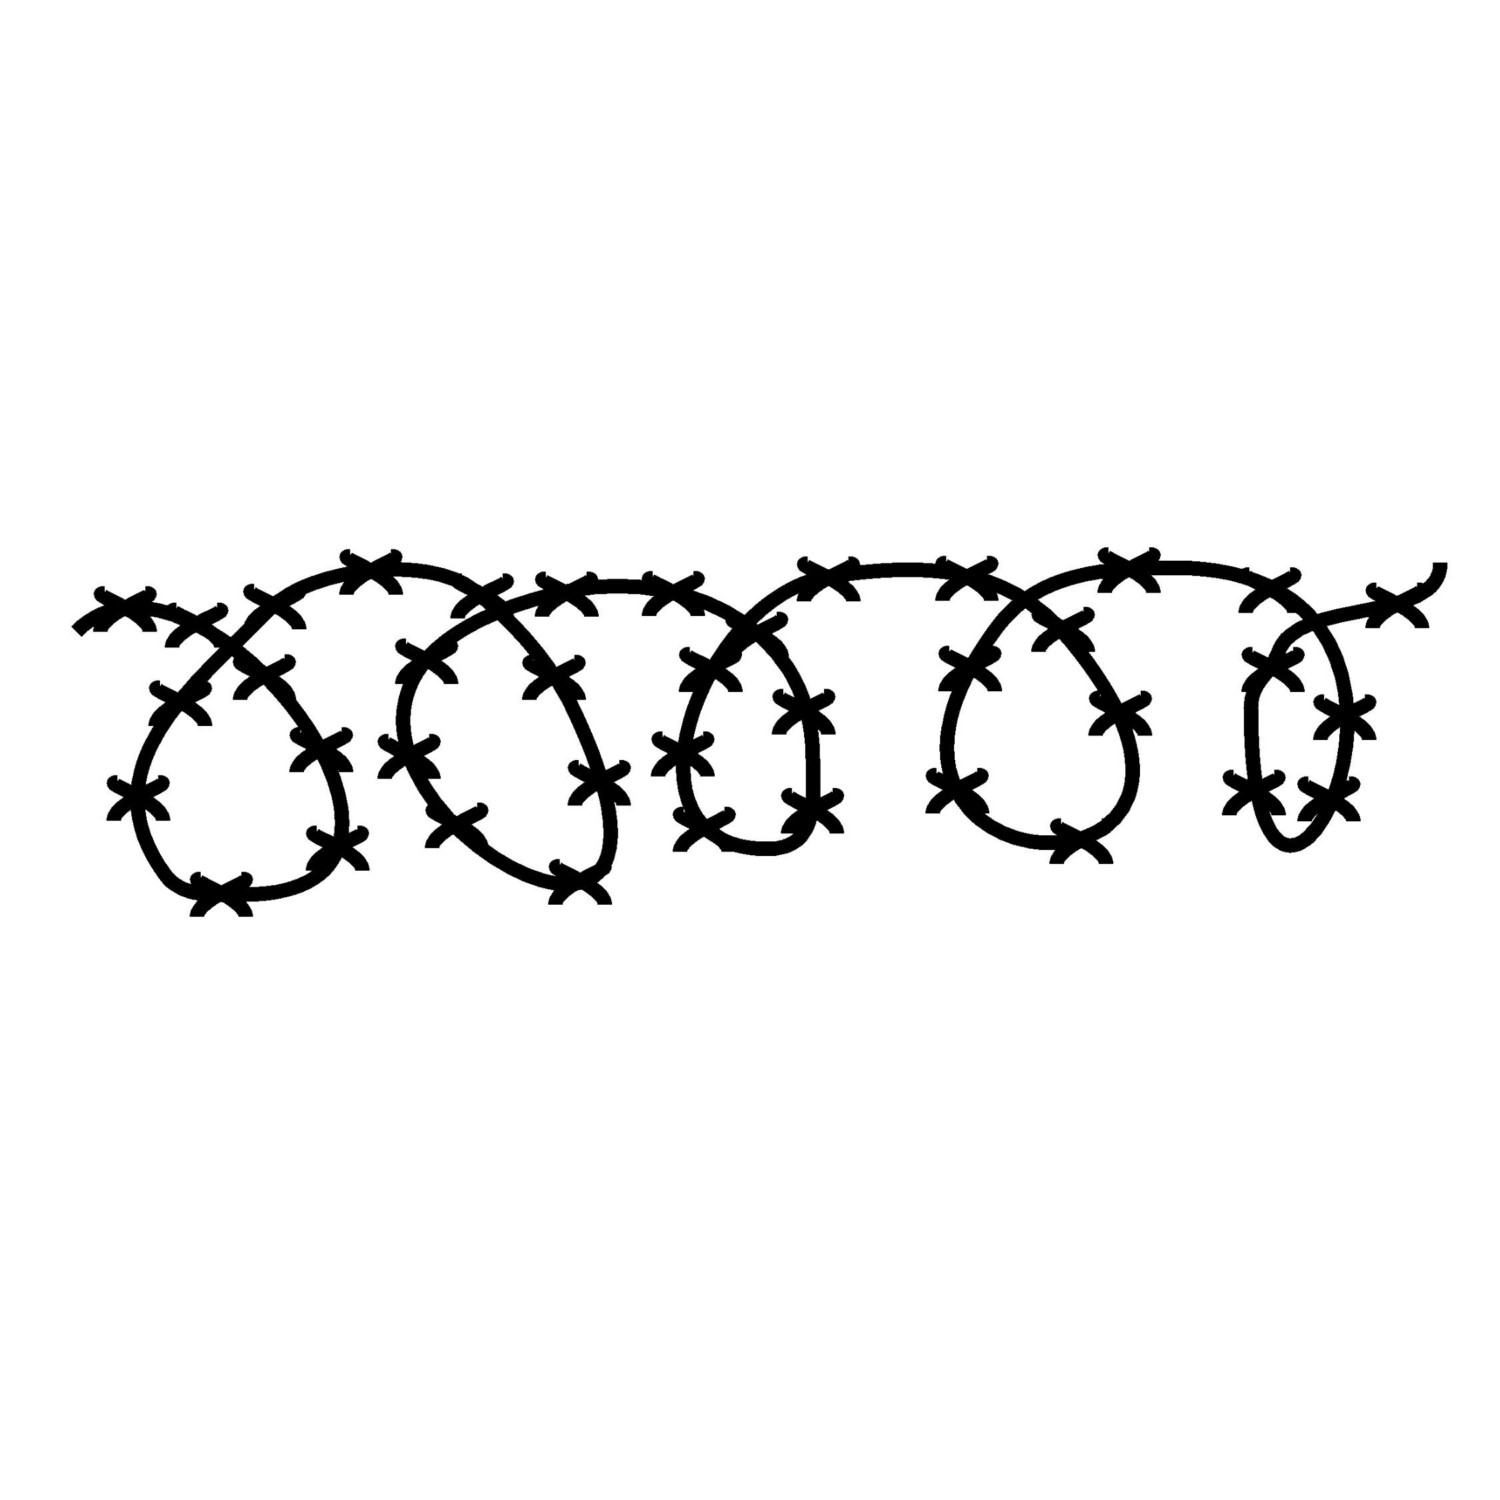 Barbed Wire Drawing - ClipArt Best